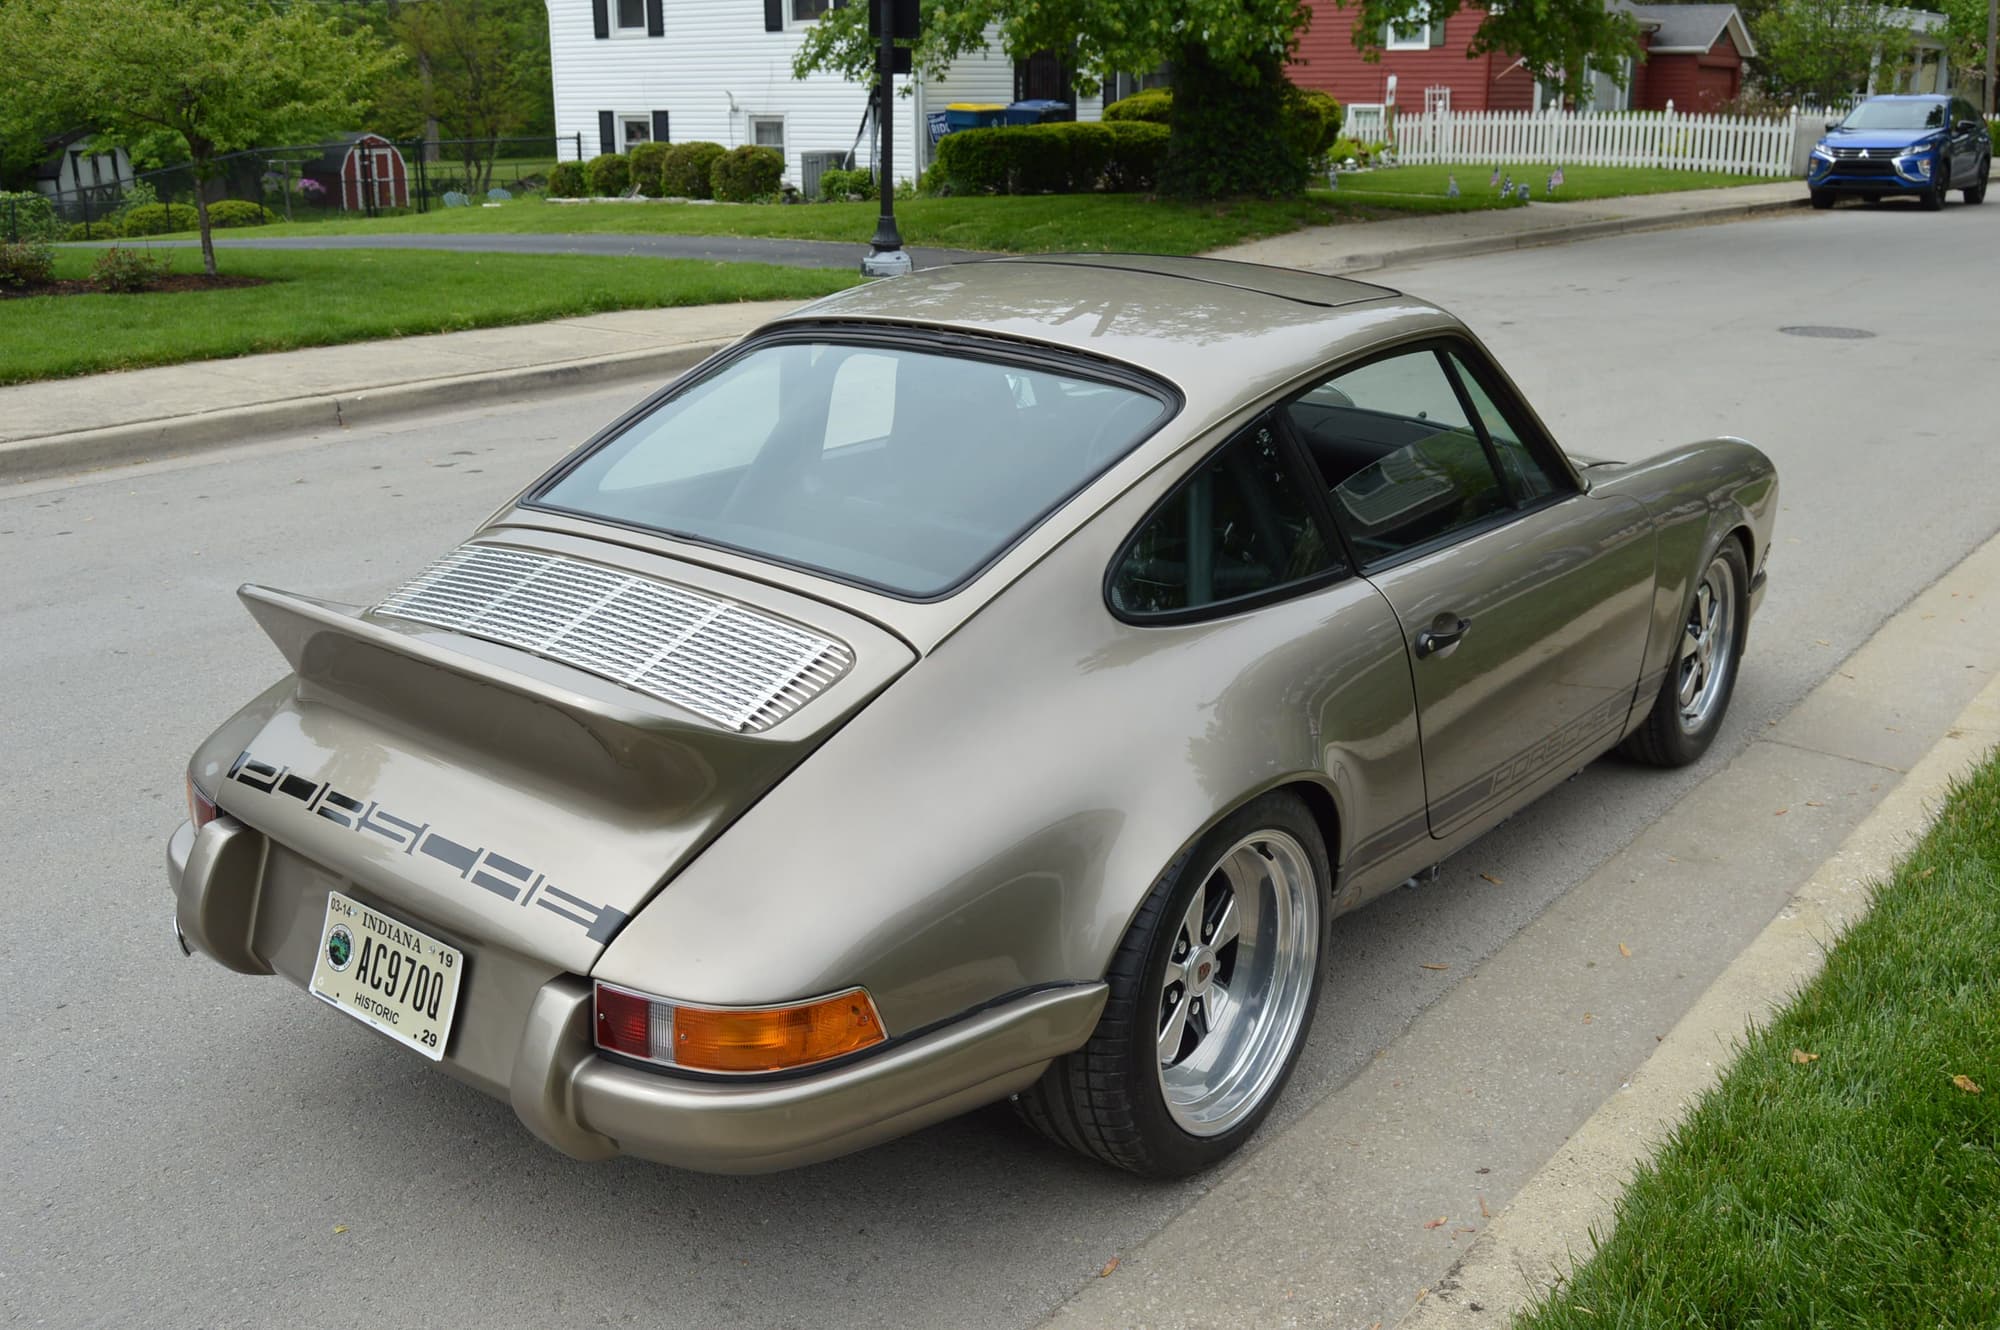 1982 Porsche 911 - Backdated 3.6L 911 - Used - VIN WP0AA091XCS121303 - 99,000 Miles - 6 cyl - 2WD - Manual - Coupe - Beige - Carmel, IN 46033, United States